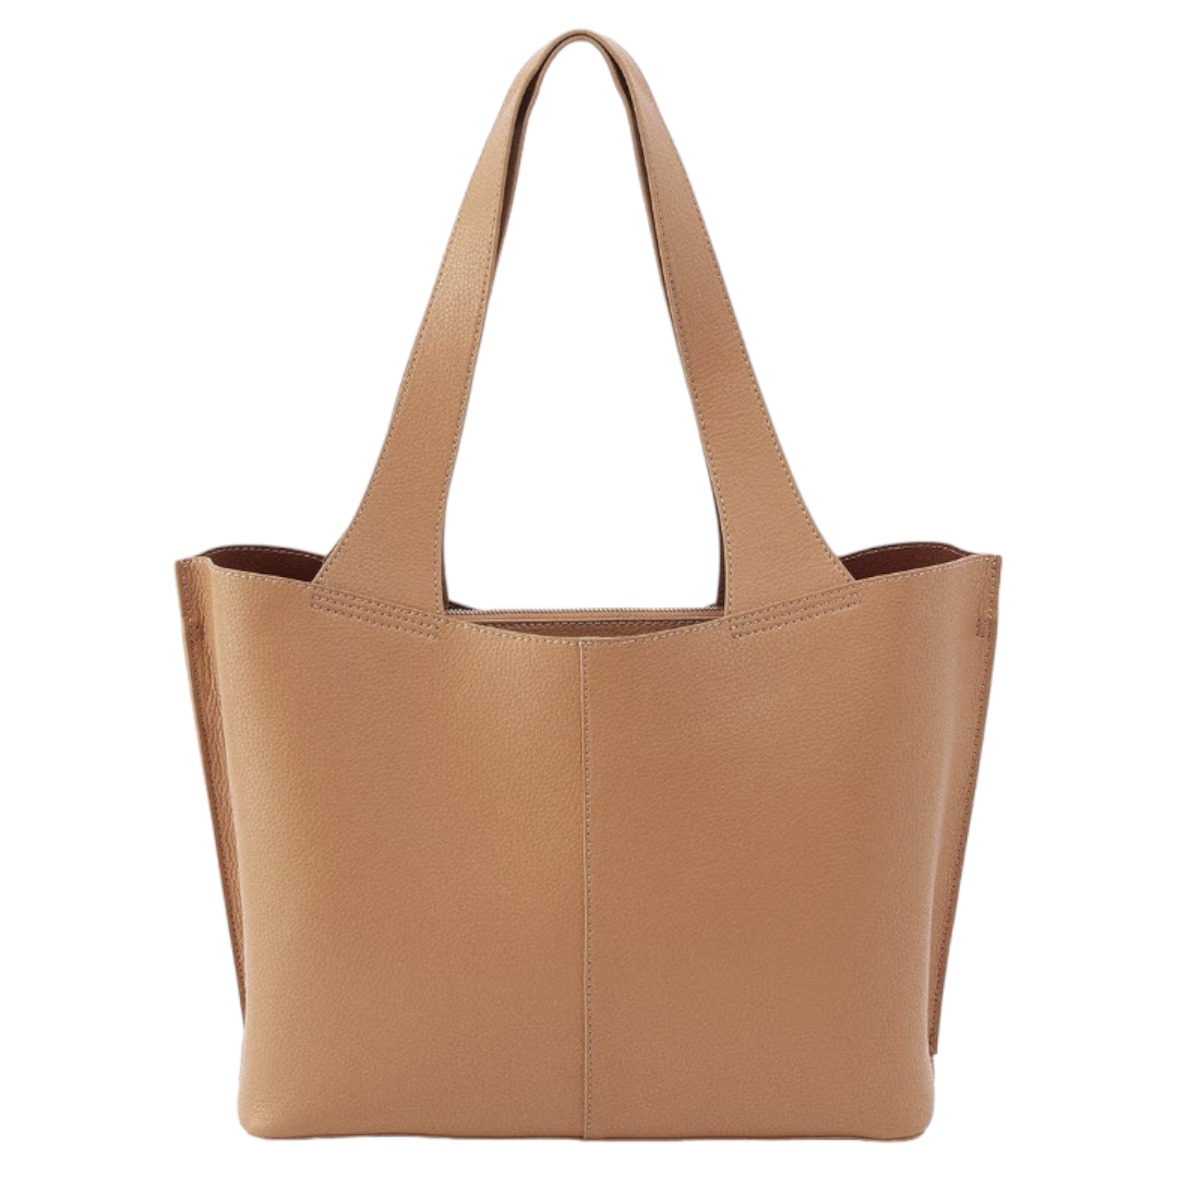 HOBO Vida Tote, Biscuit in Micro Pebbled Leather | MP-57525BSCS | Borsheims